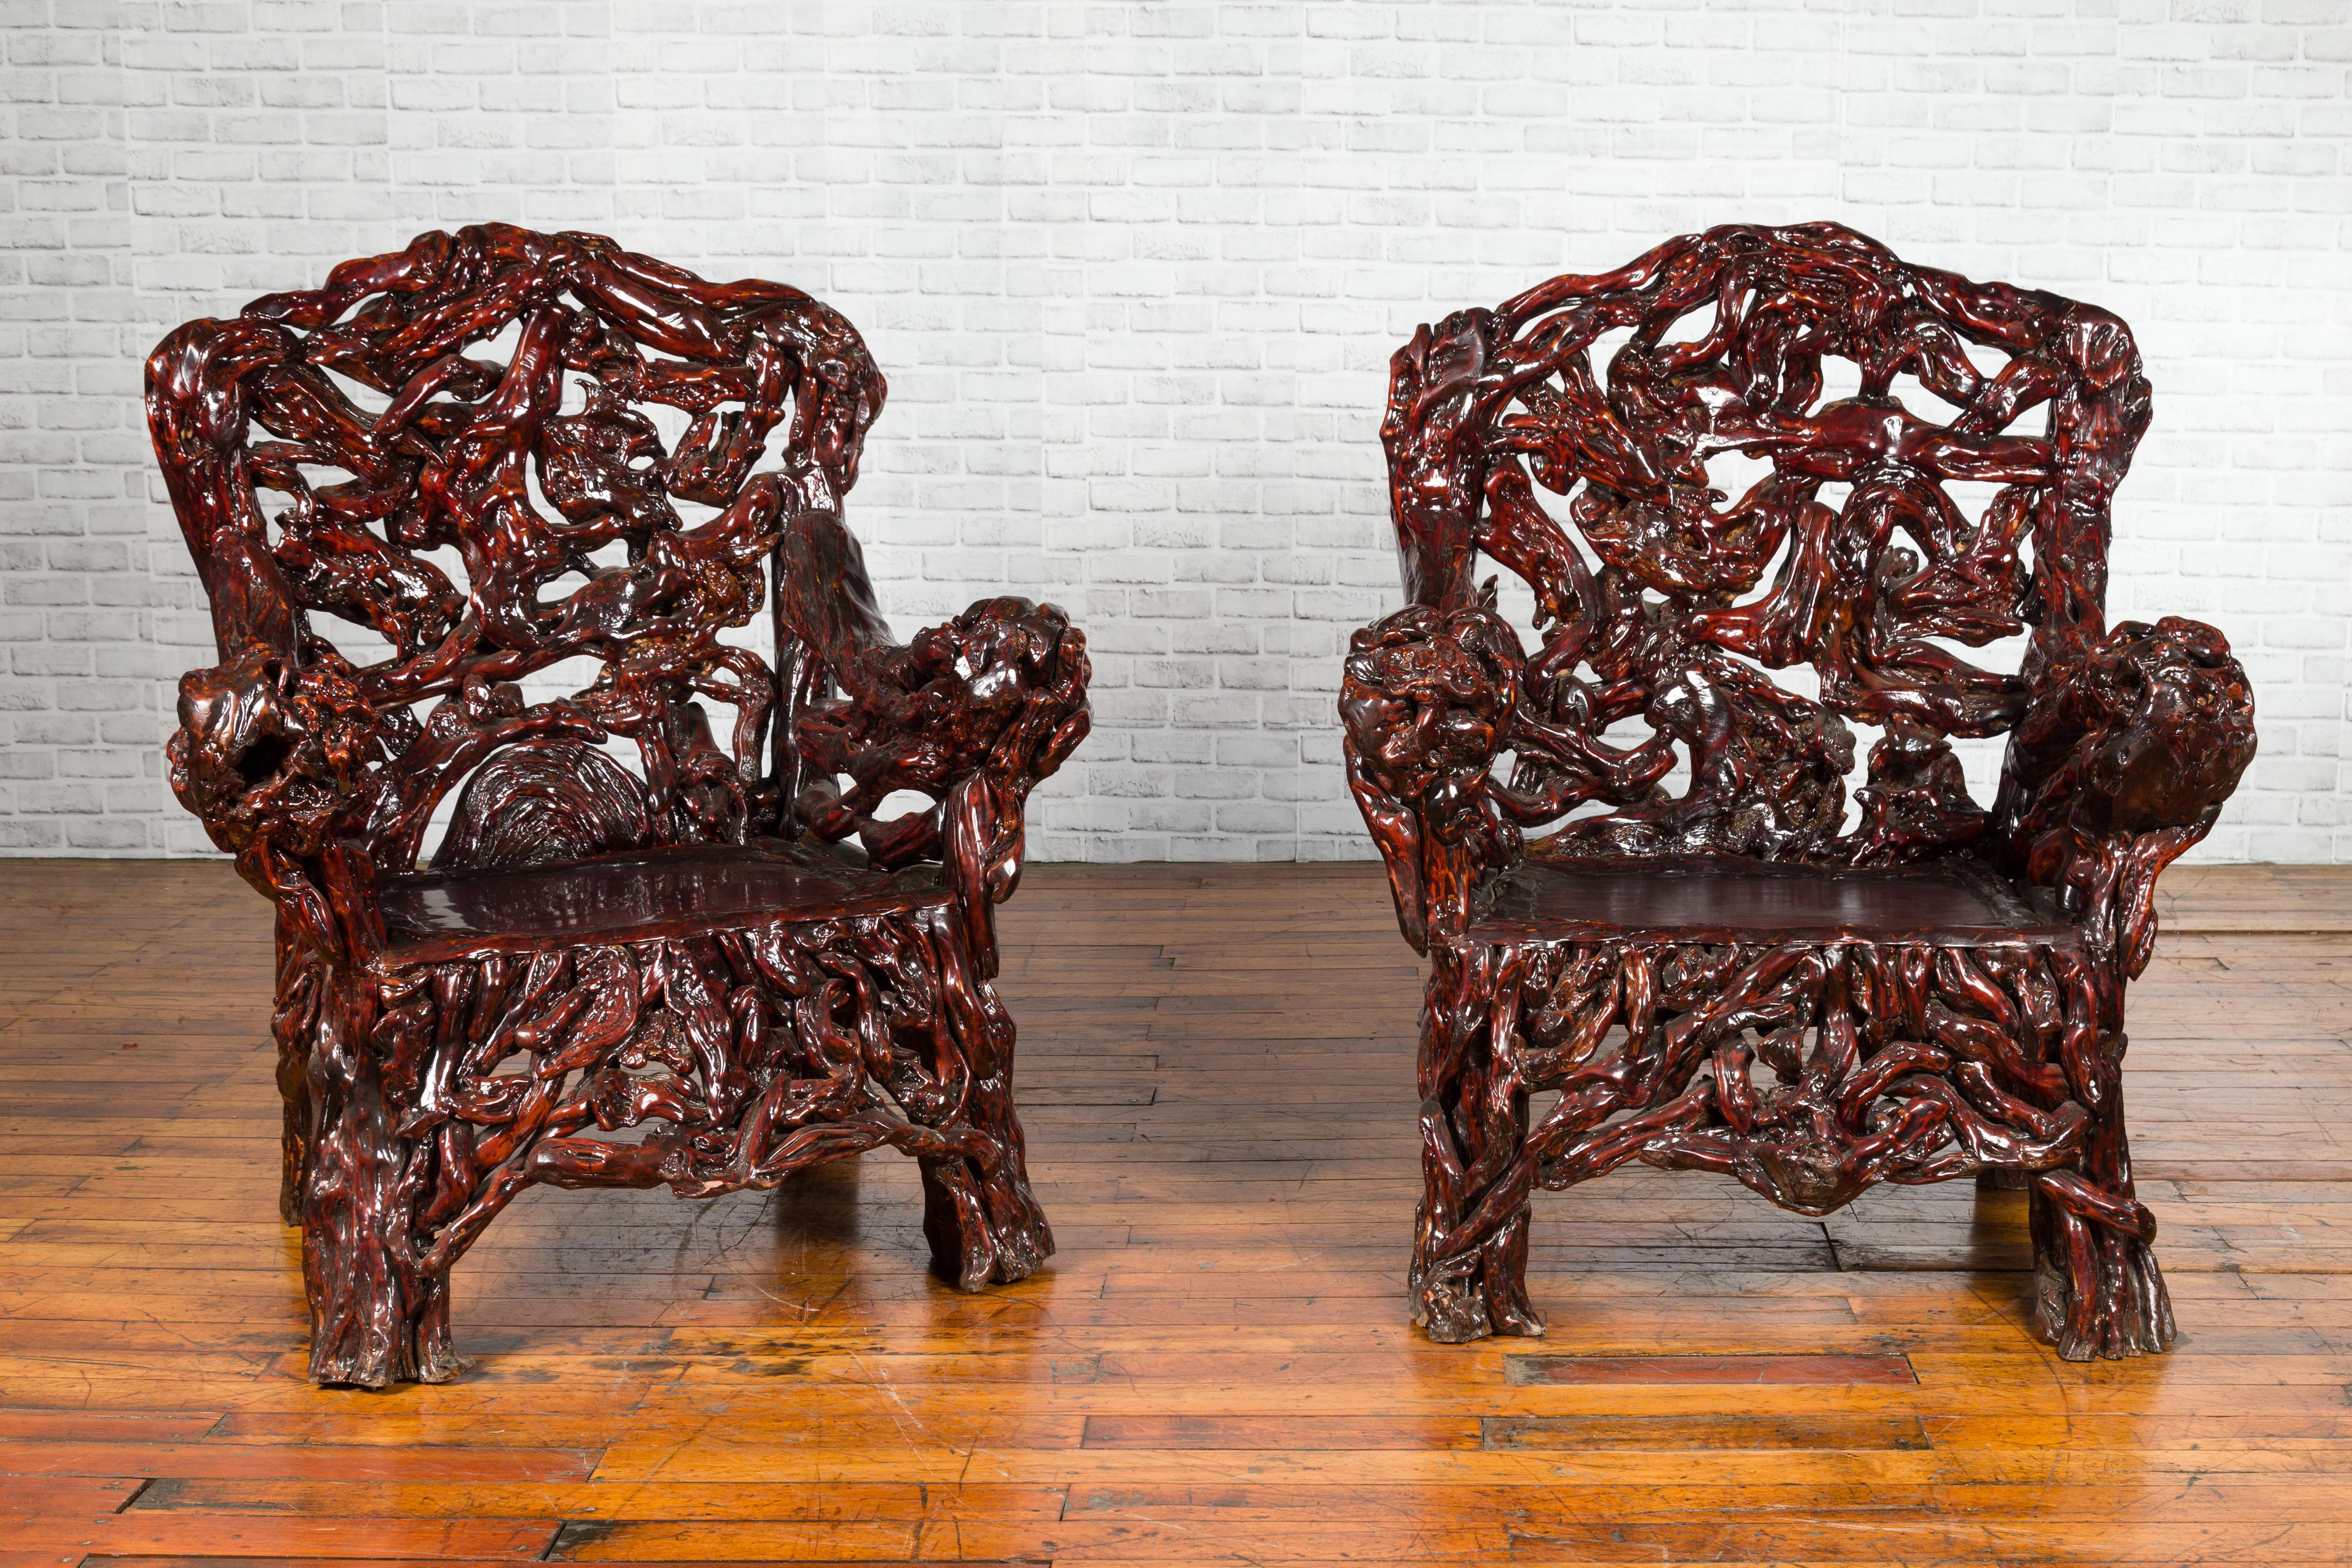 A pair of Chinese hand carved azalea wood root armchair from the late 20th century, priced and sold individually $5,500 each. Created in China during the later years of the 20th century, chair was handcrafted from an actual azalea tree, giving them